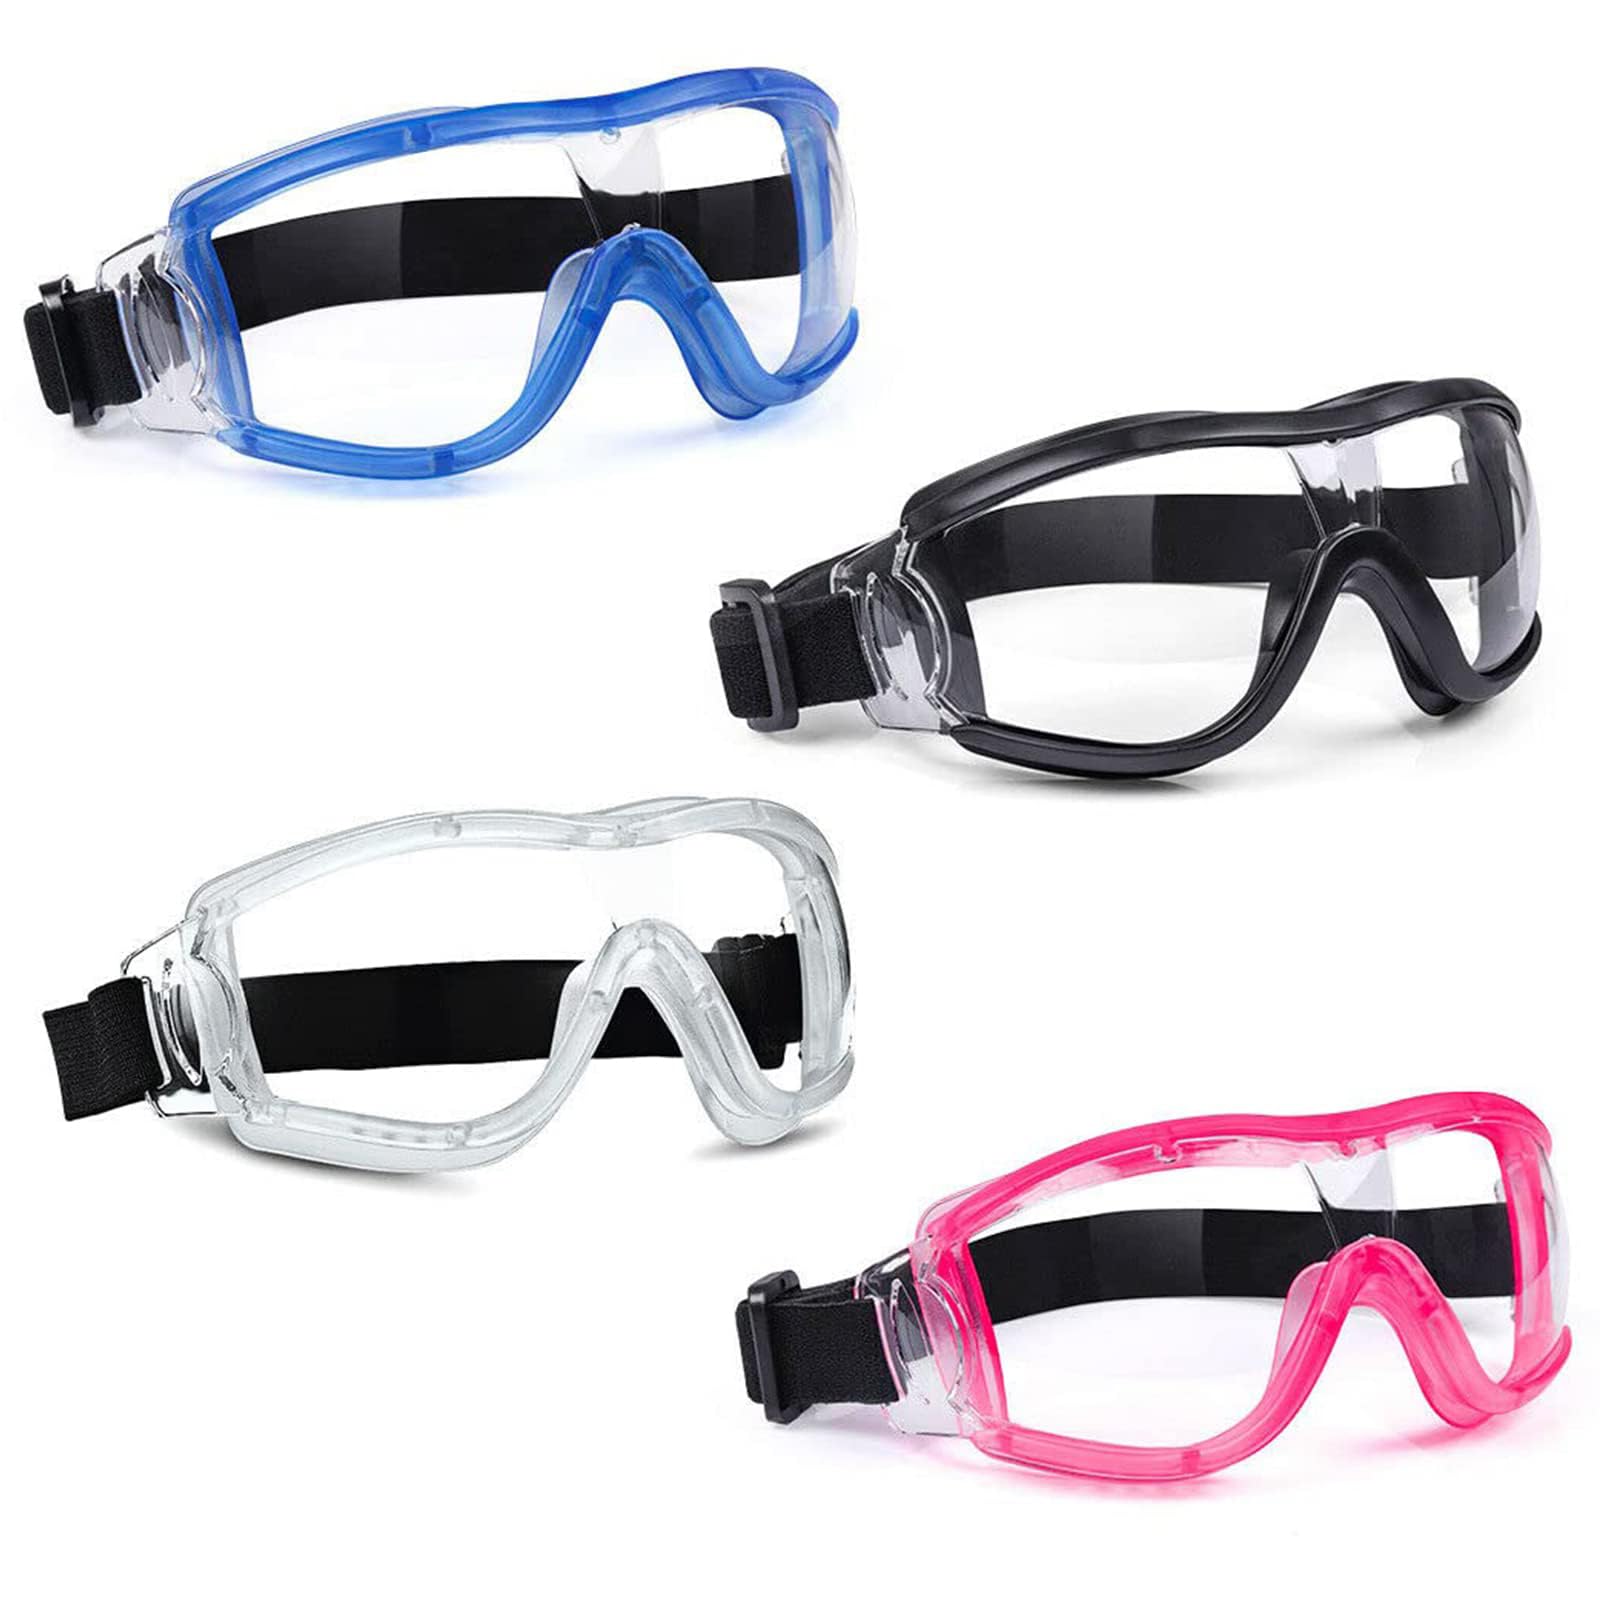 YIHAIXINGWEI Kids Safety Glasses Kids Goggles Childrens Windproof Eyes Protective UV Antifog Lab Gifts For Outdoor Sport. (4 Colors Set)